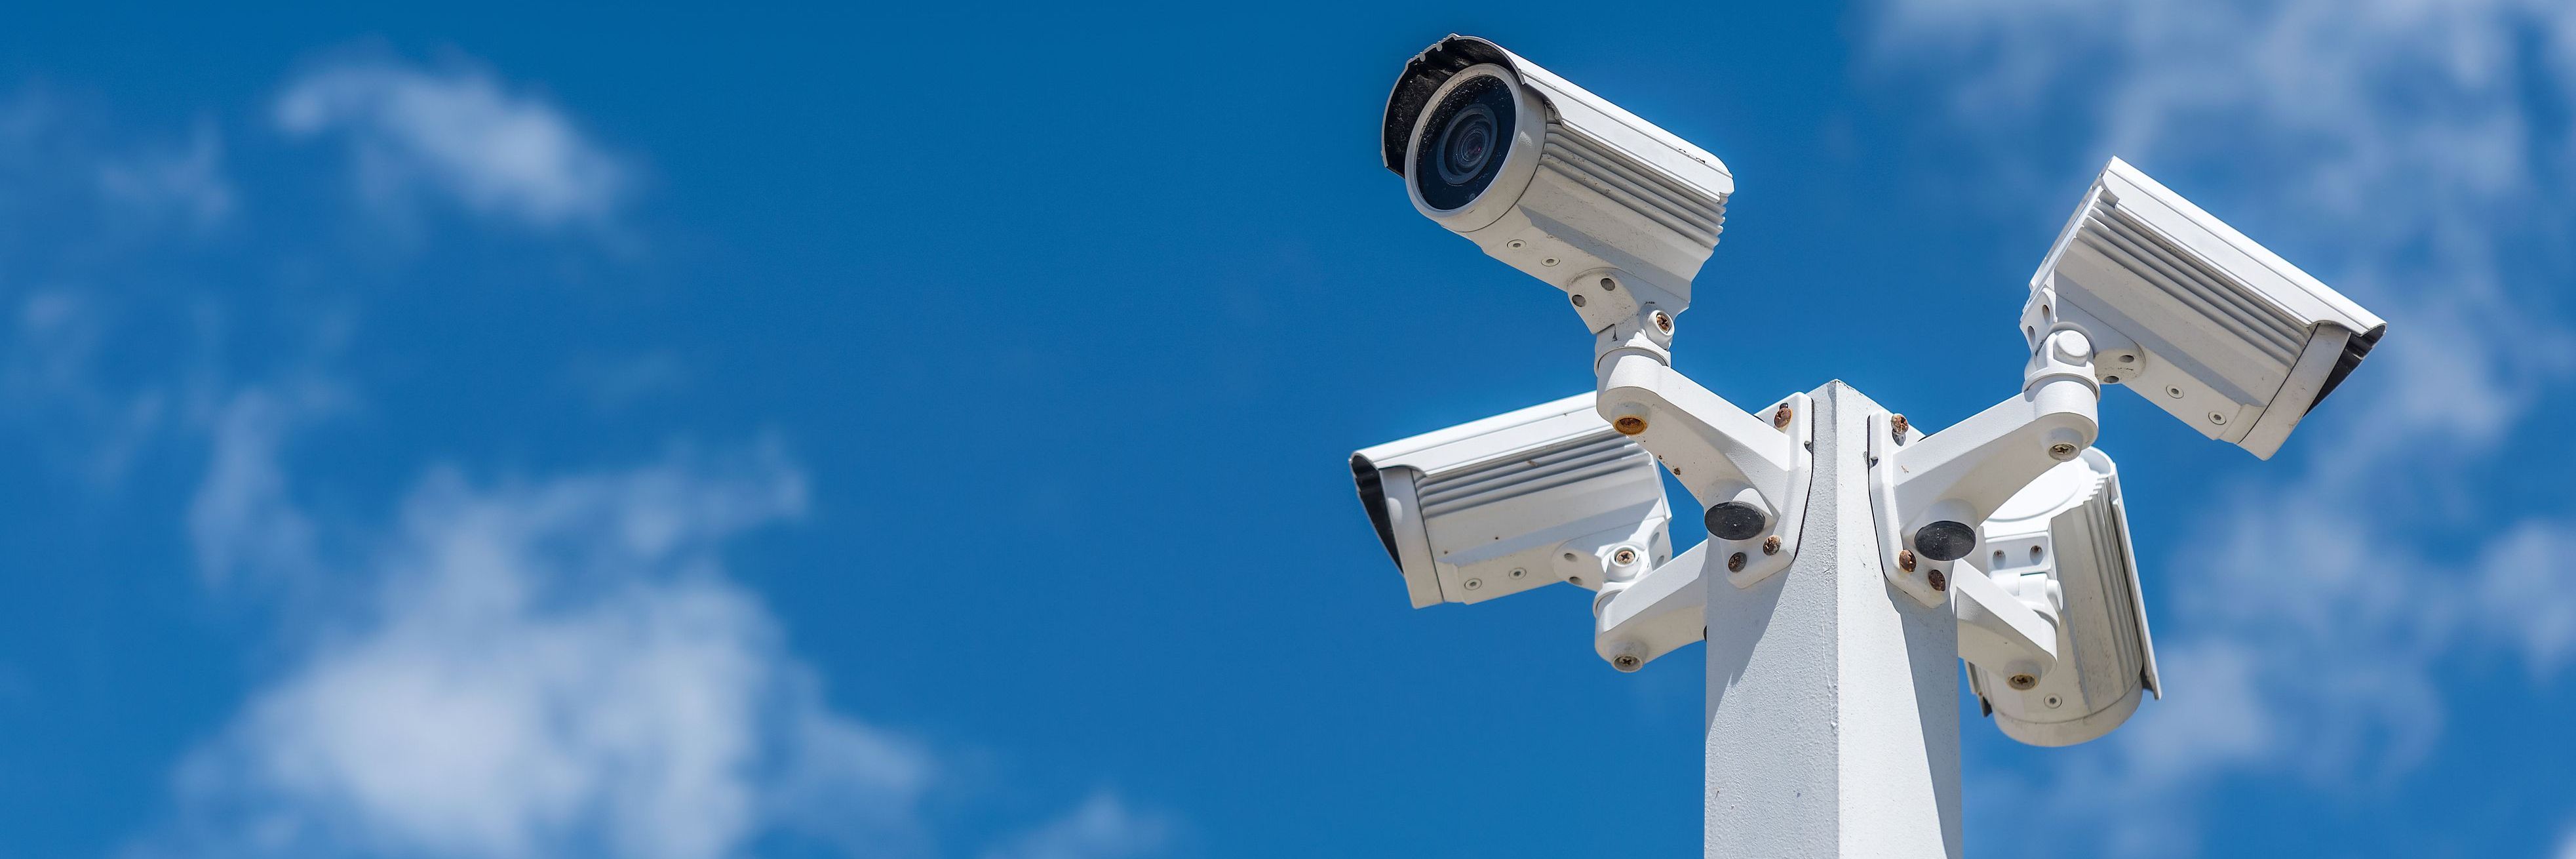 CCTV & Data Protection - The Key Issues Explored 